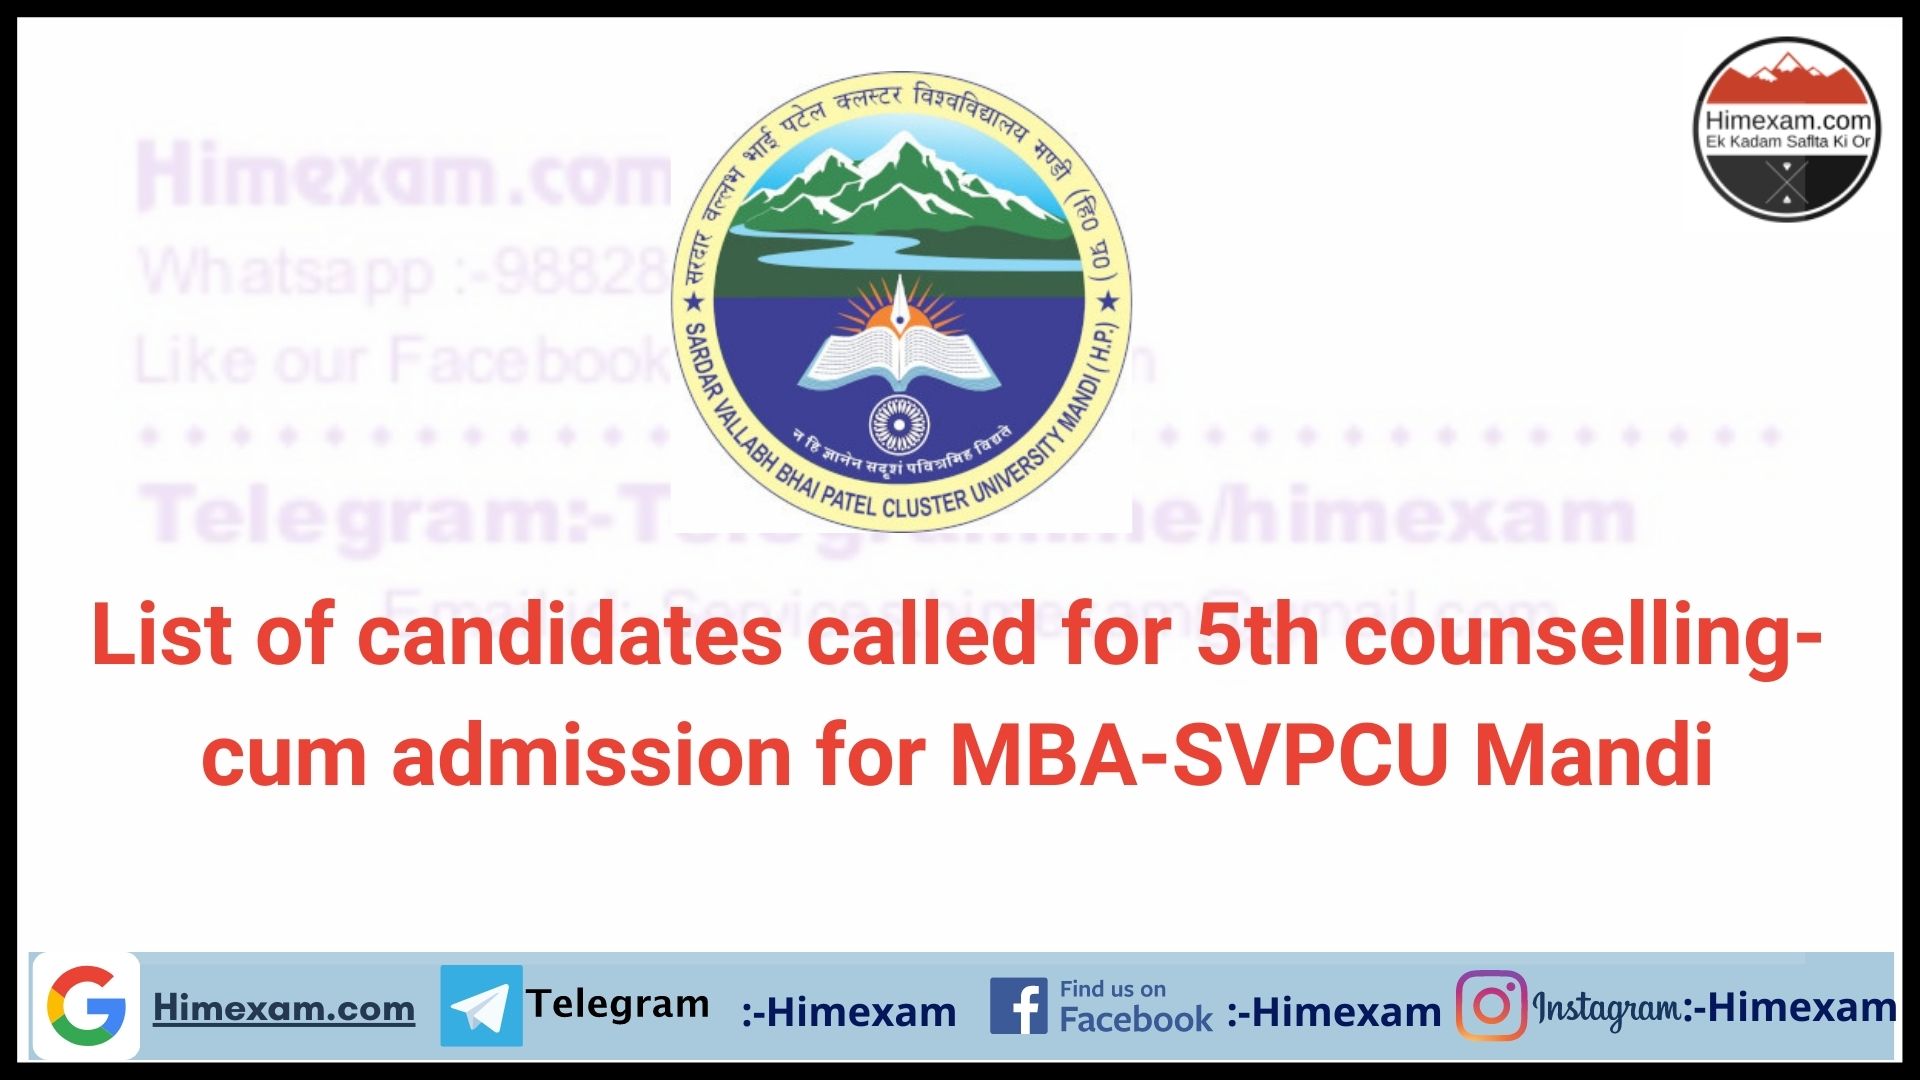 List of candidates called for 5th counselling-cum admission for MBA-SVPCU Mandi